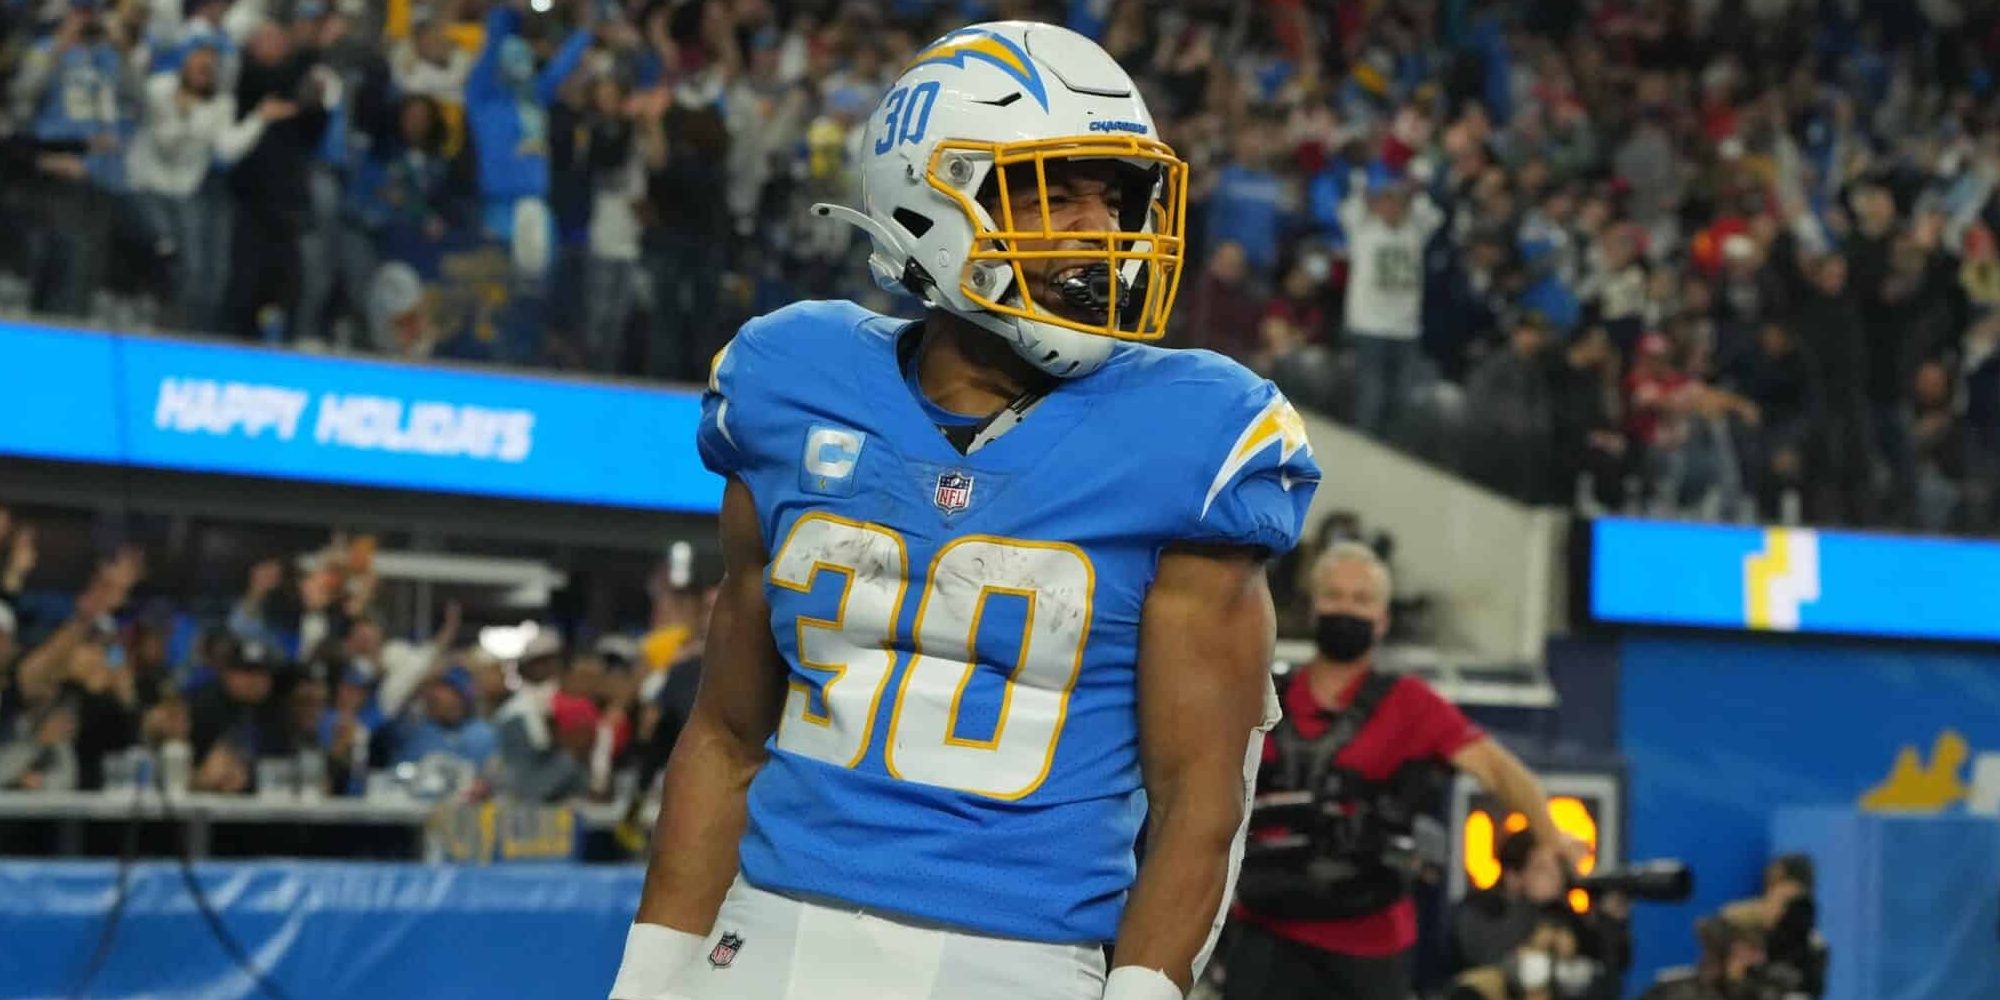 Austin Ekeler yelling during a touchdown celebration in powder blue Chargers jersey